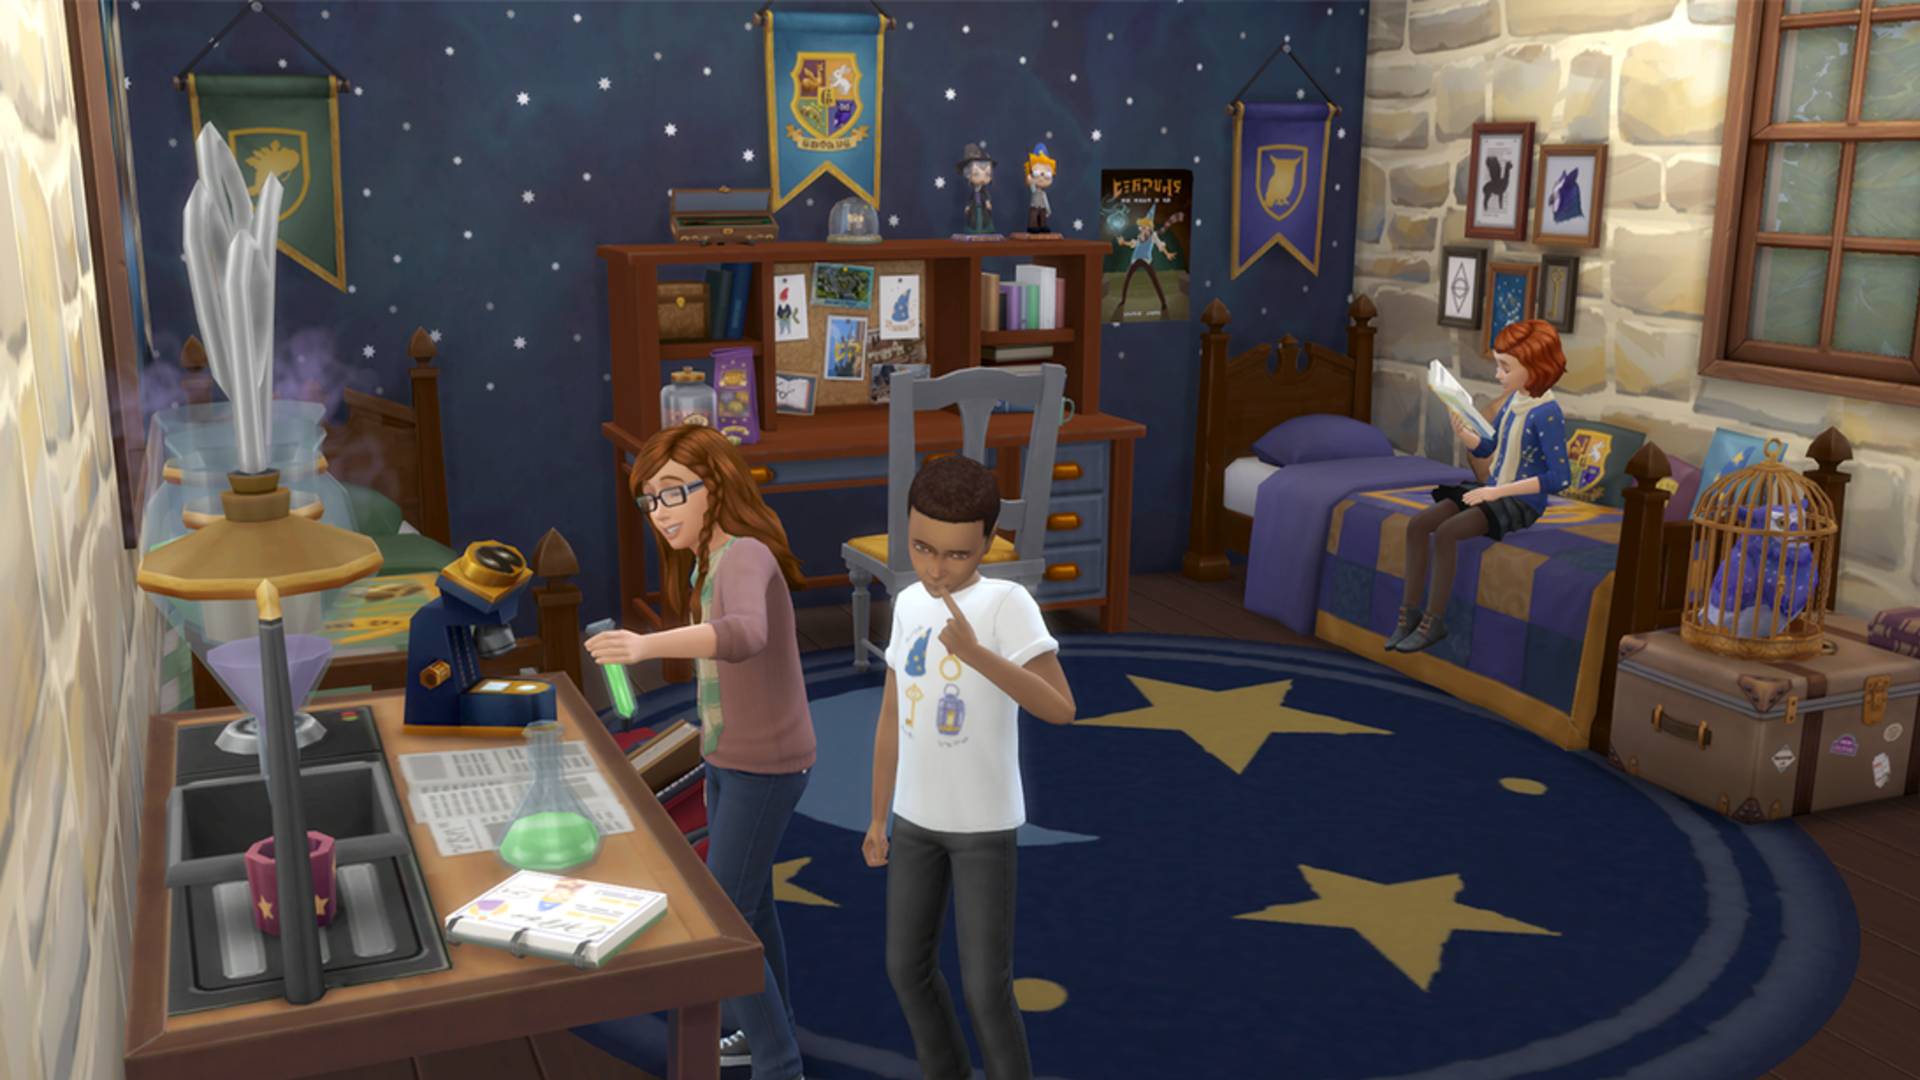 Sims 4 CC: A kid's bedroom furnished in wizard themed items and decorations, including a banner displaying the Harry Potter Hogwarts crest.